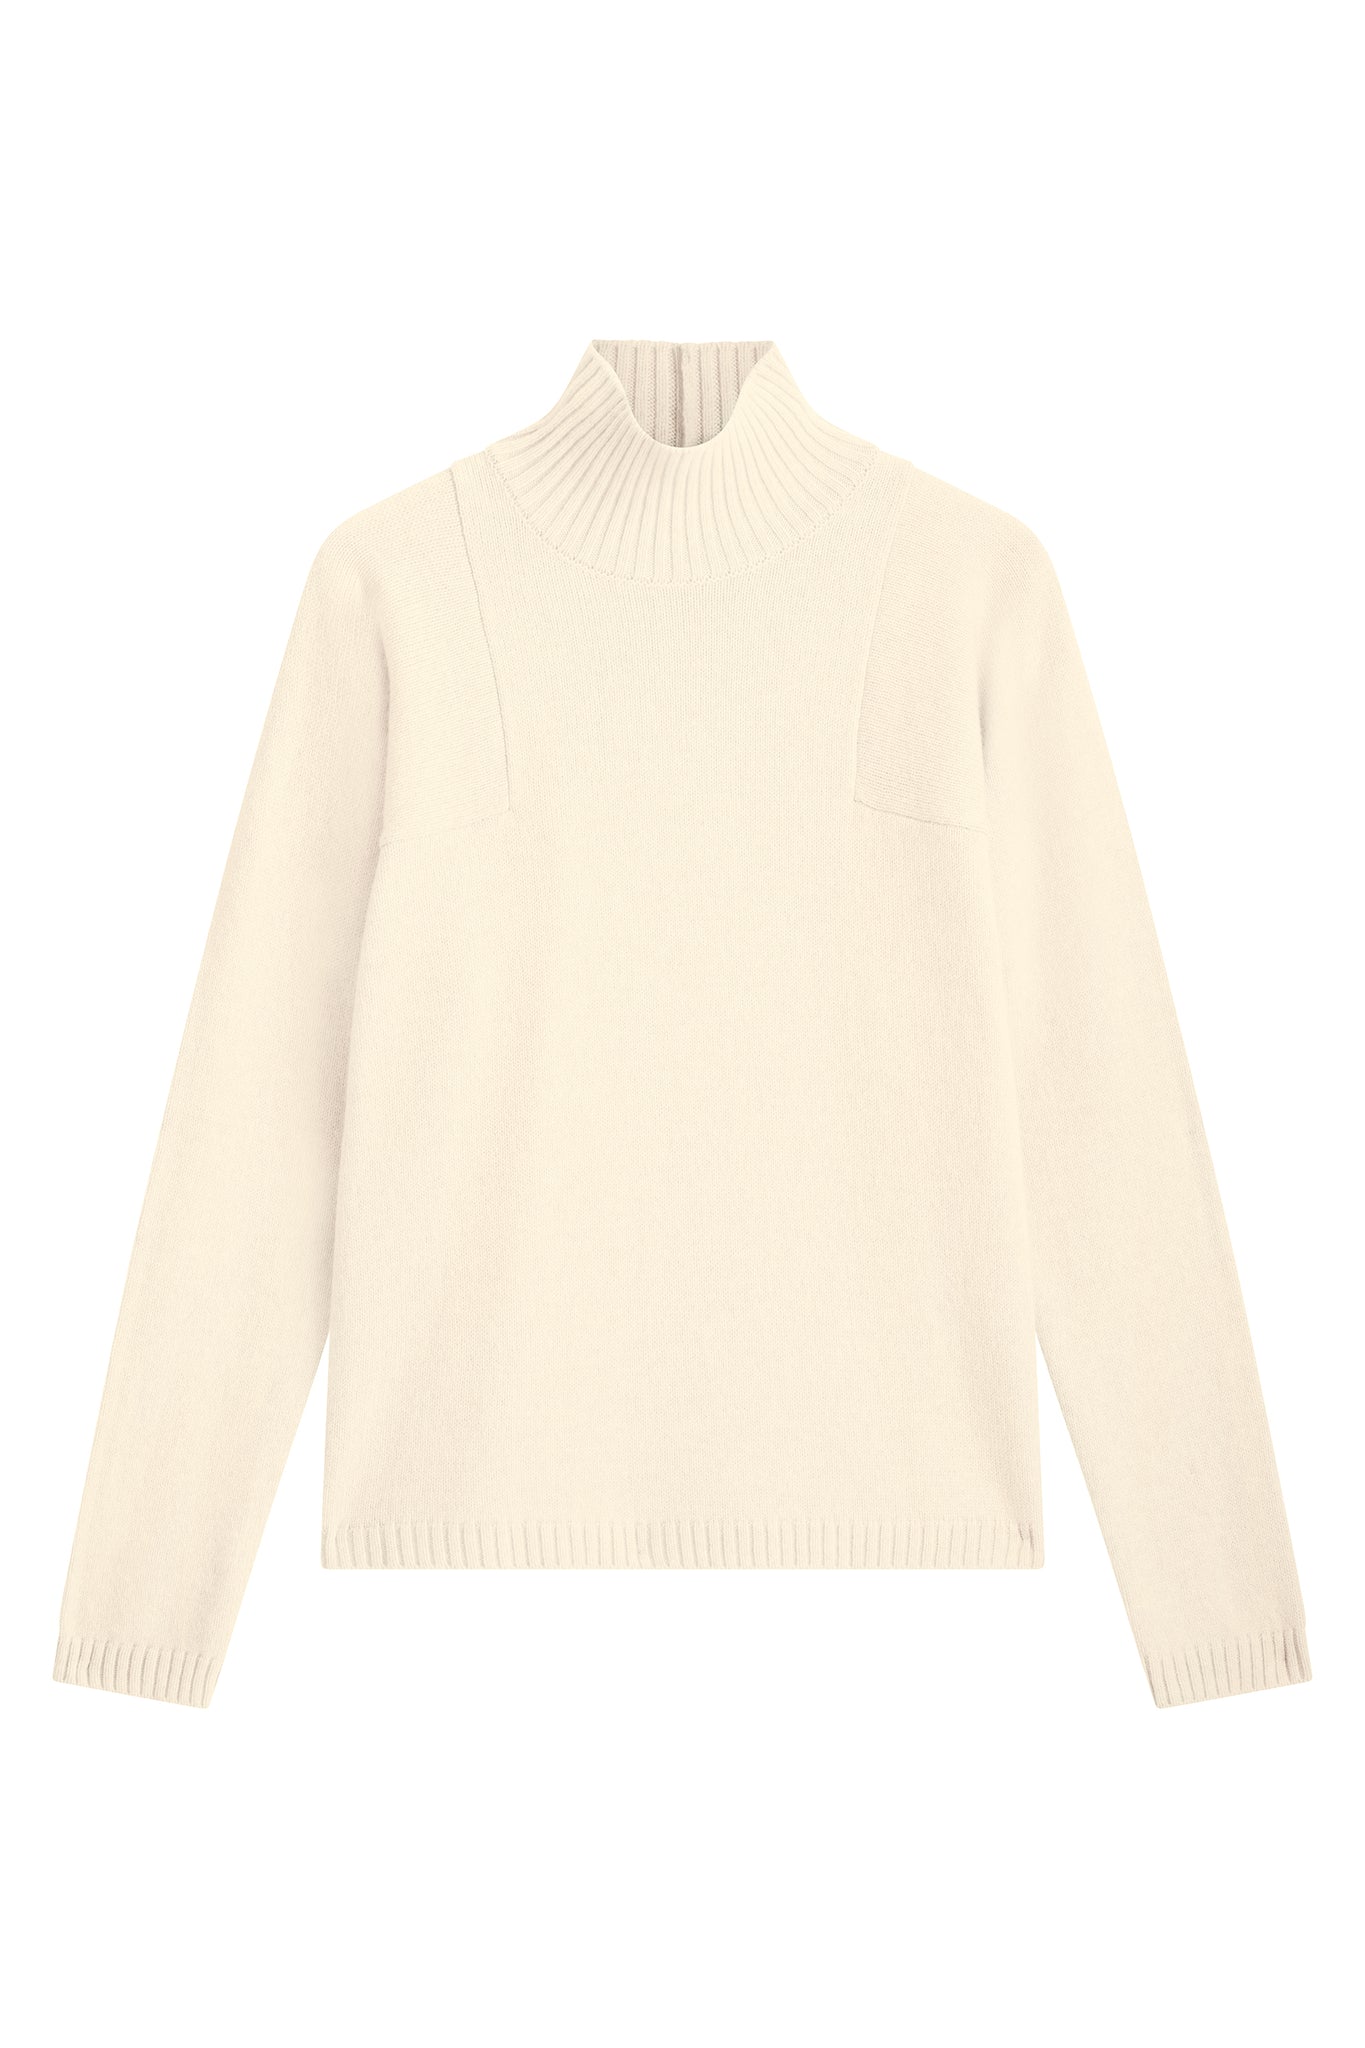 White cashmere turtle neck with deep modified drop sleeves